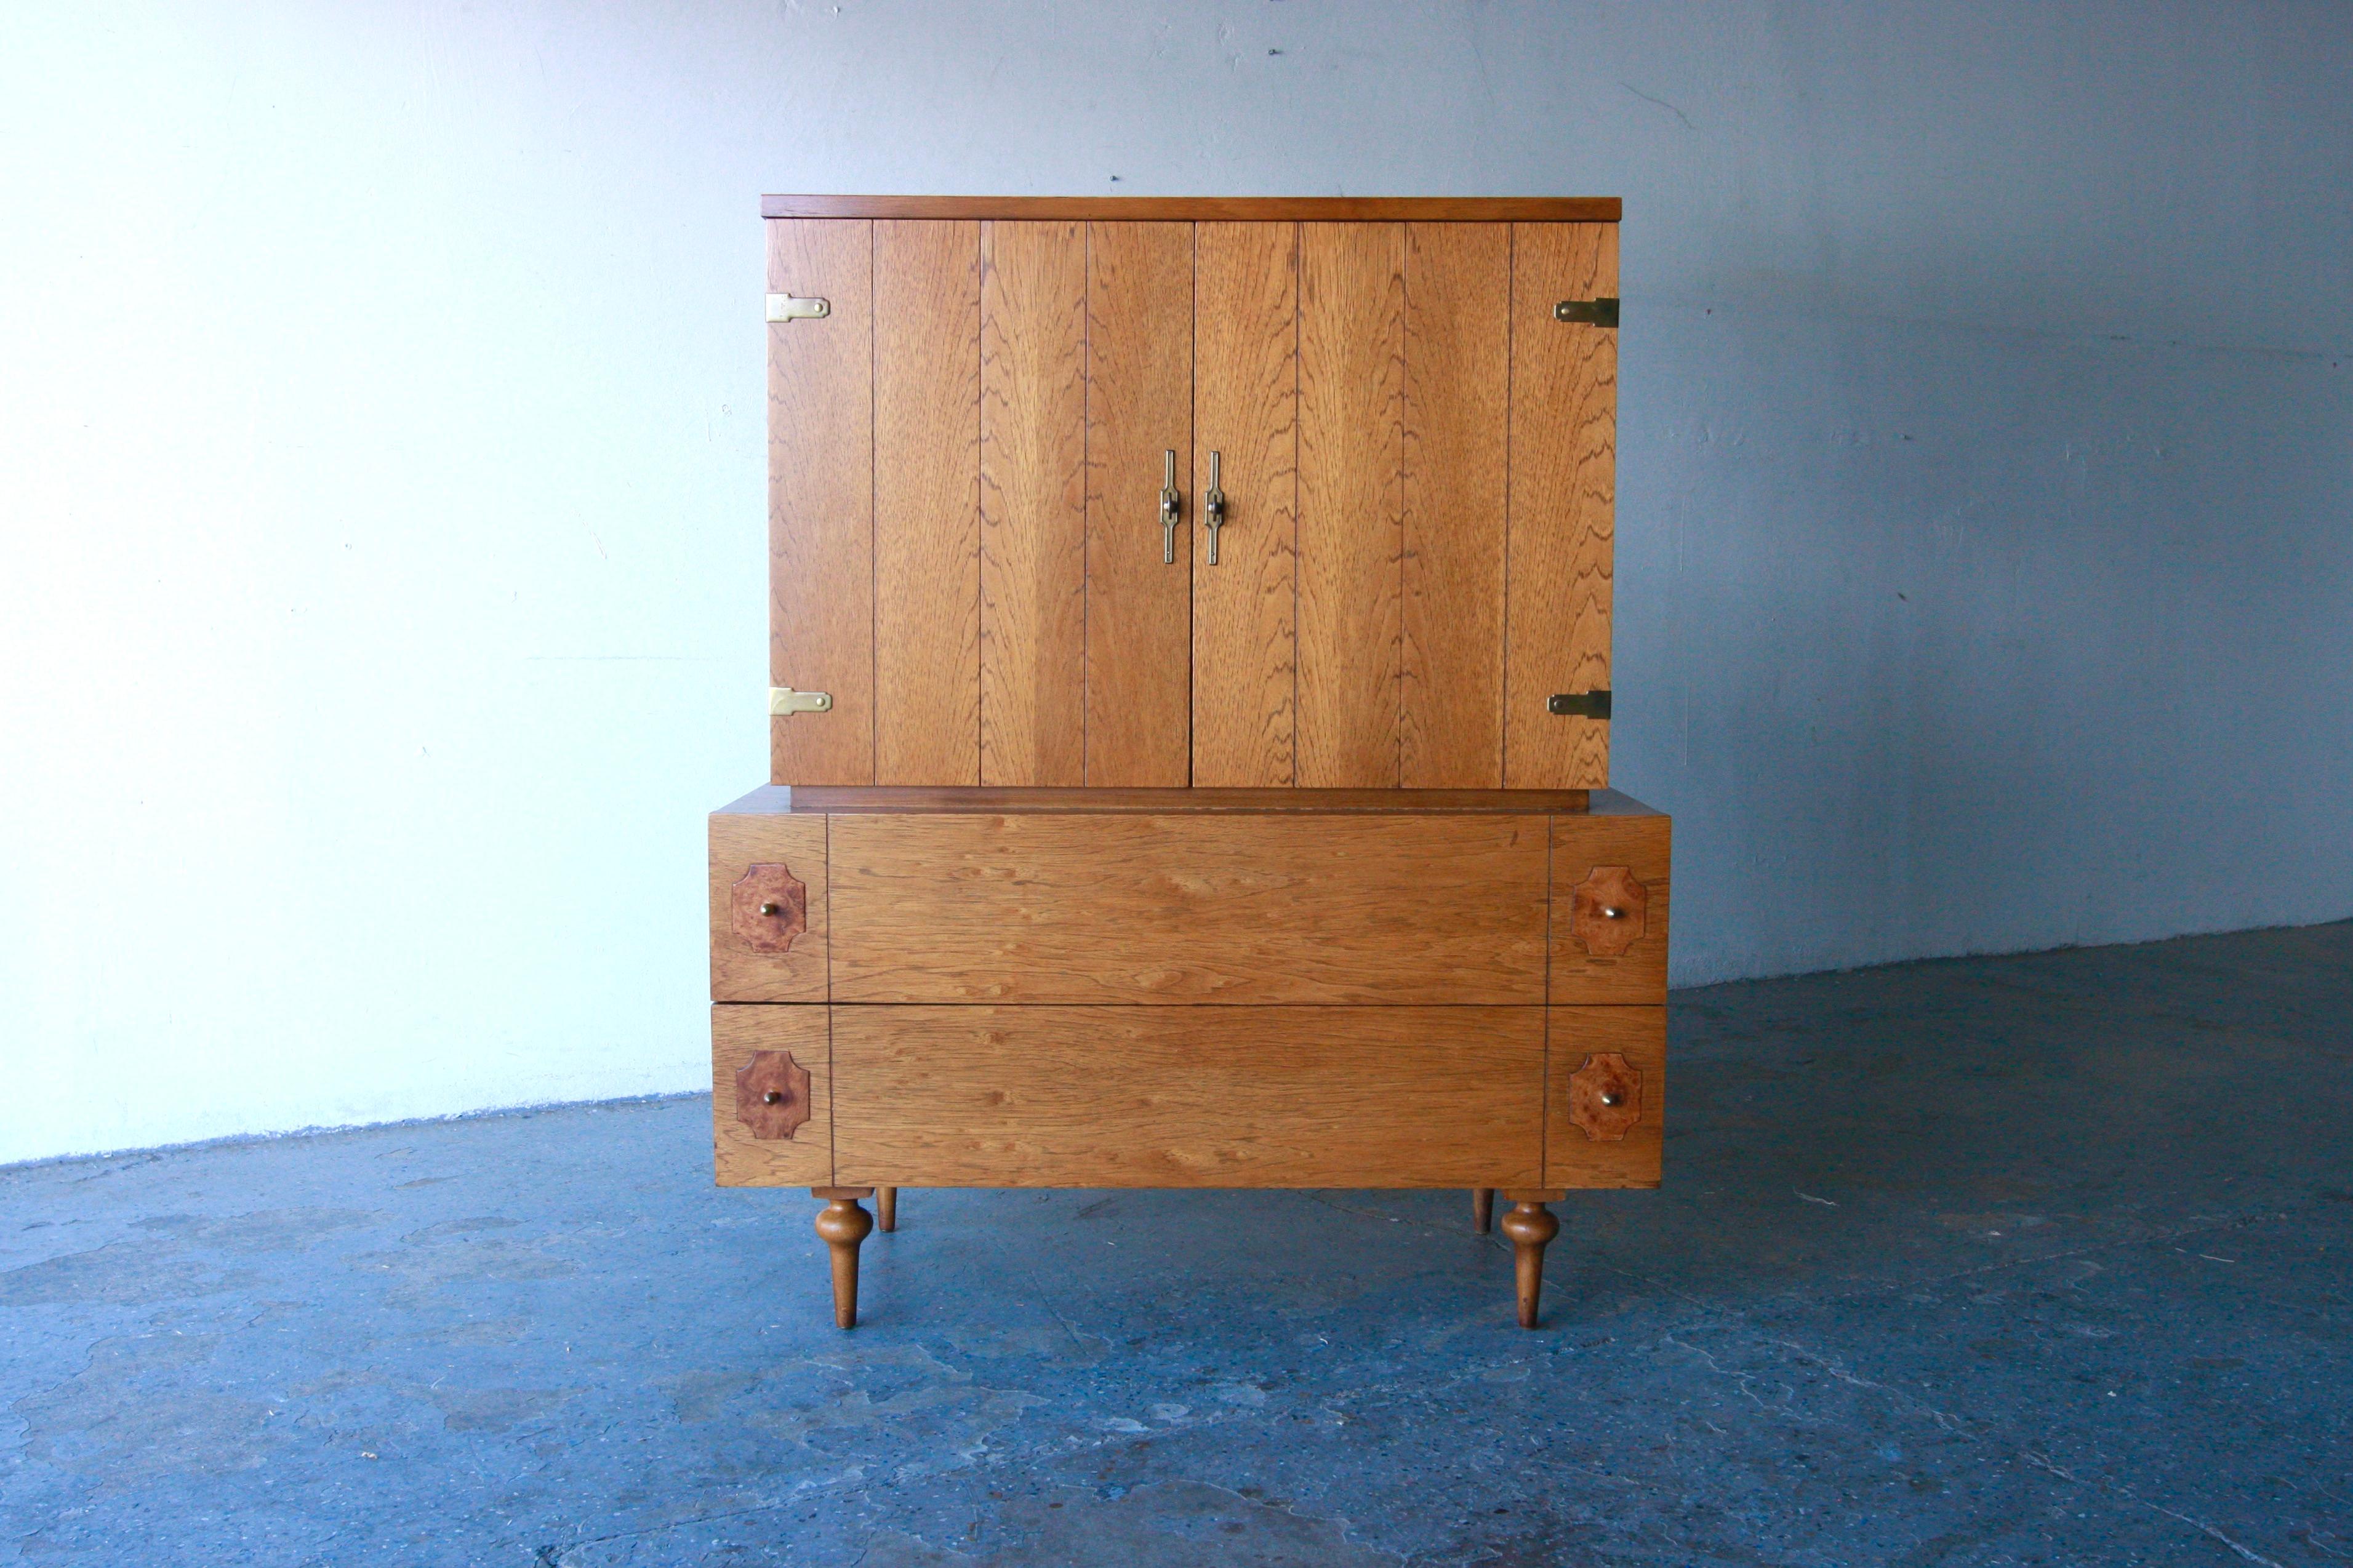 Mid Century modern highboy/gentlemen’s chest by American of Martinsville. Here is a beautiful mid-century highboy dresser which has loads of storage for all your goodies! The top portion has two open doors, which house 3 wood drawers. The bottom